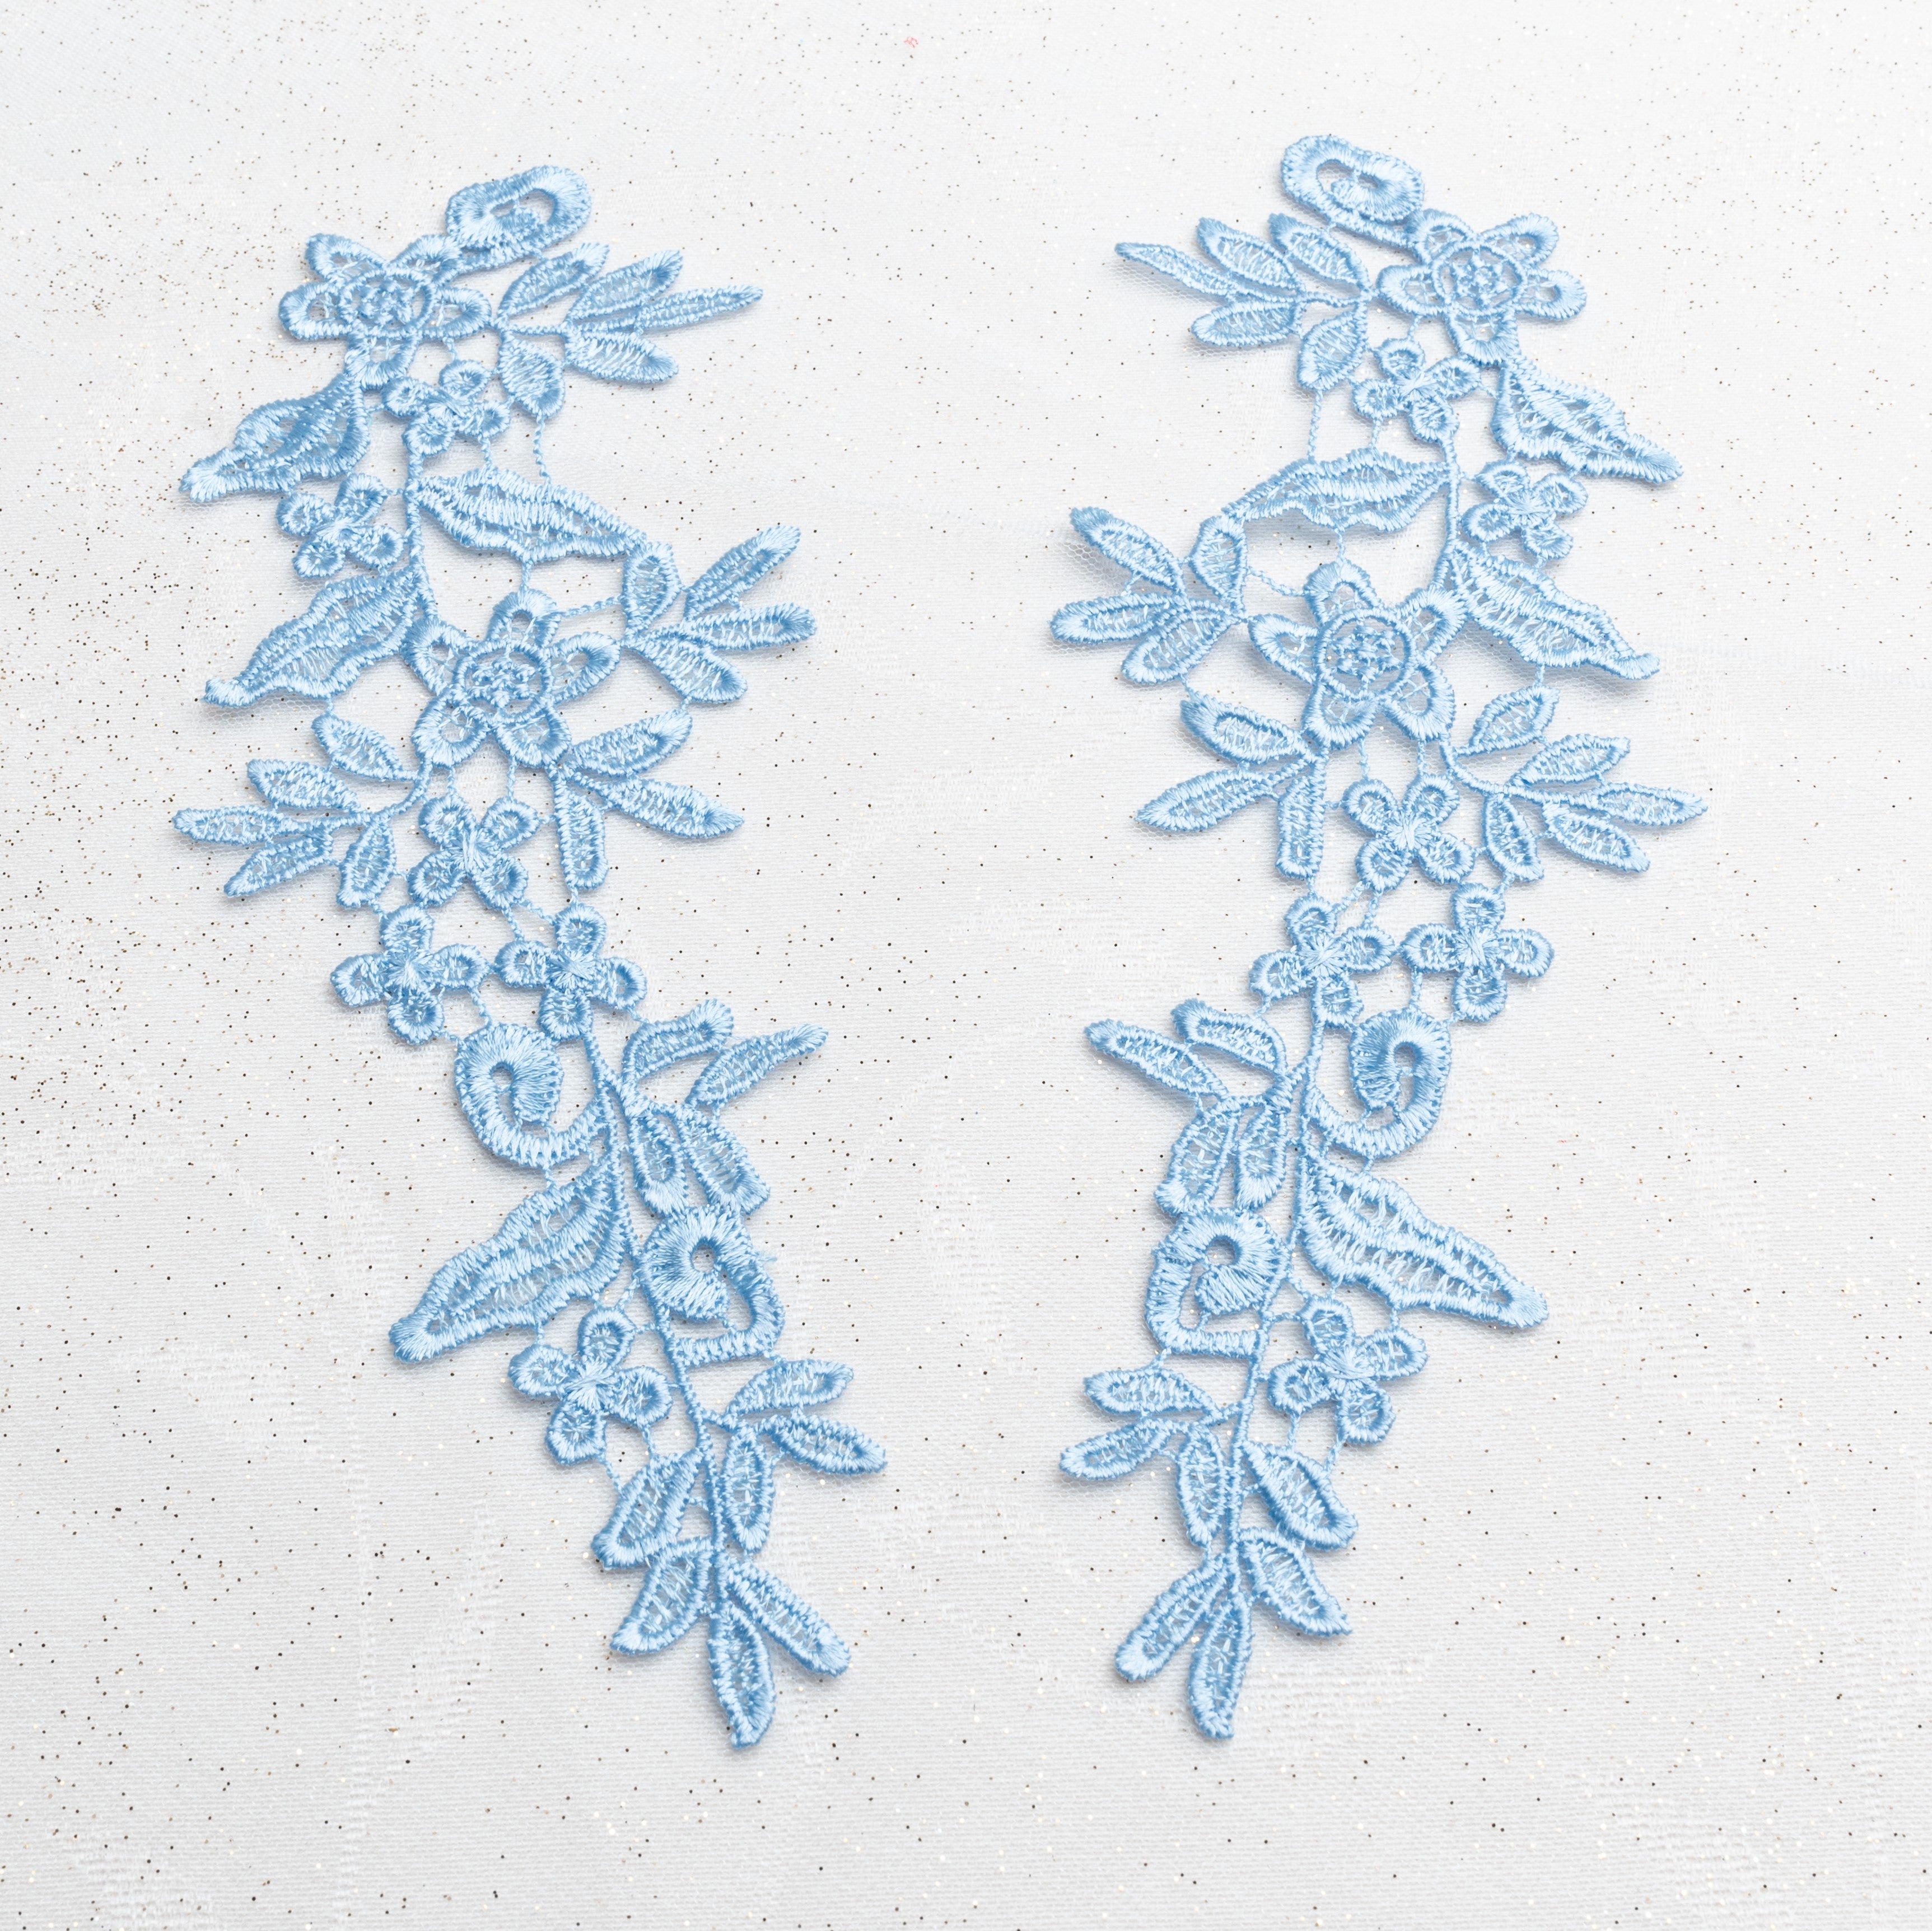 Heavily embroidered sky blue mirrored lace applique pair laying flat on a white background.